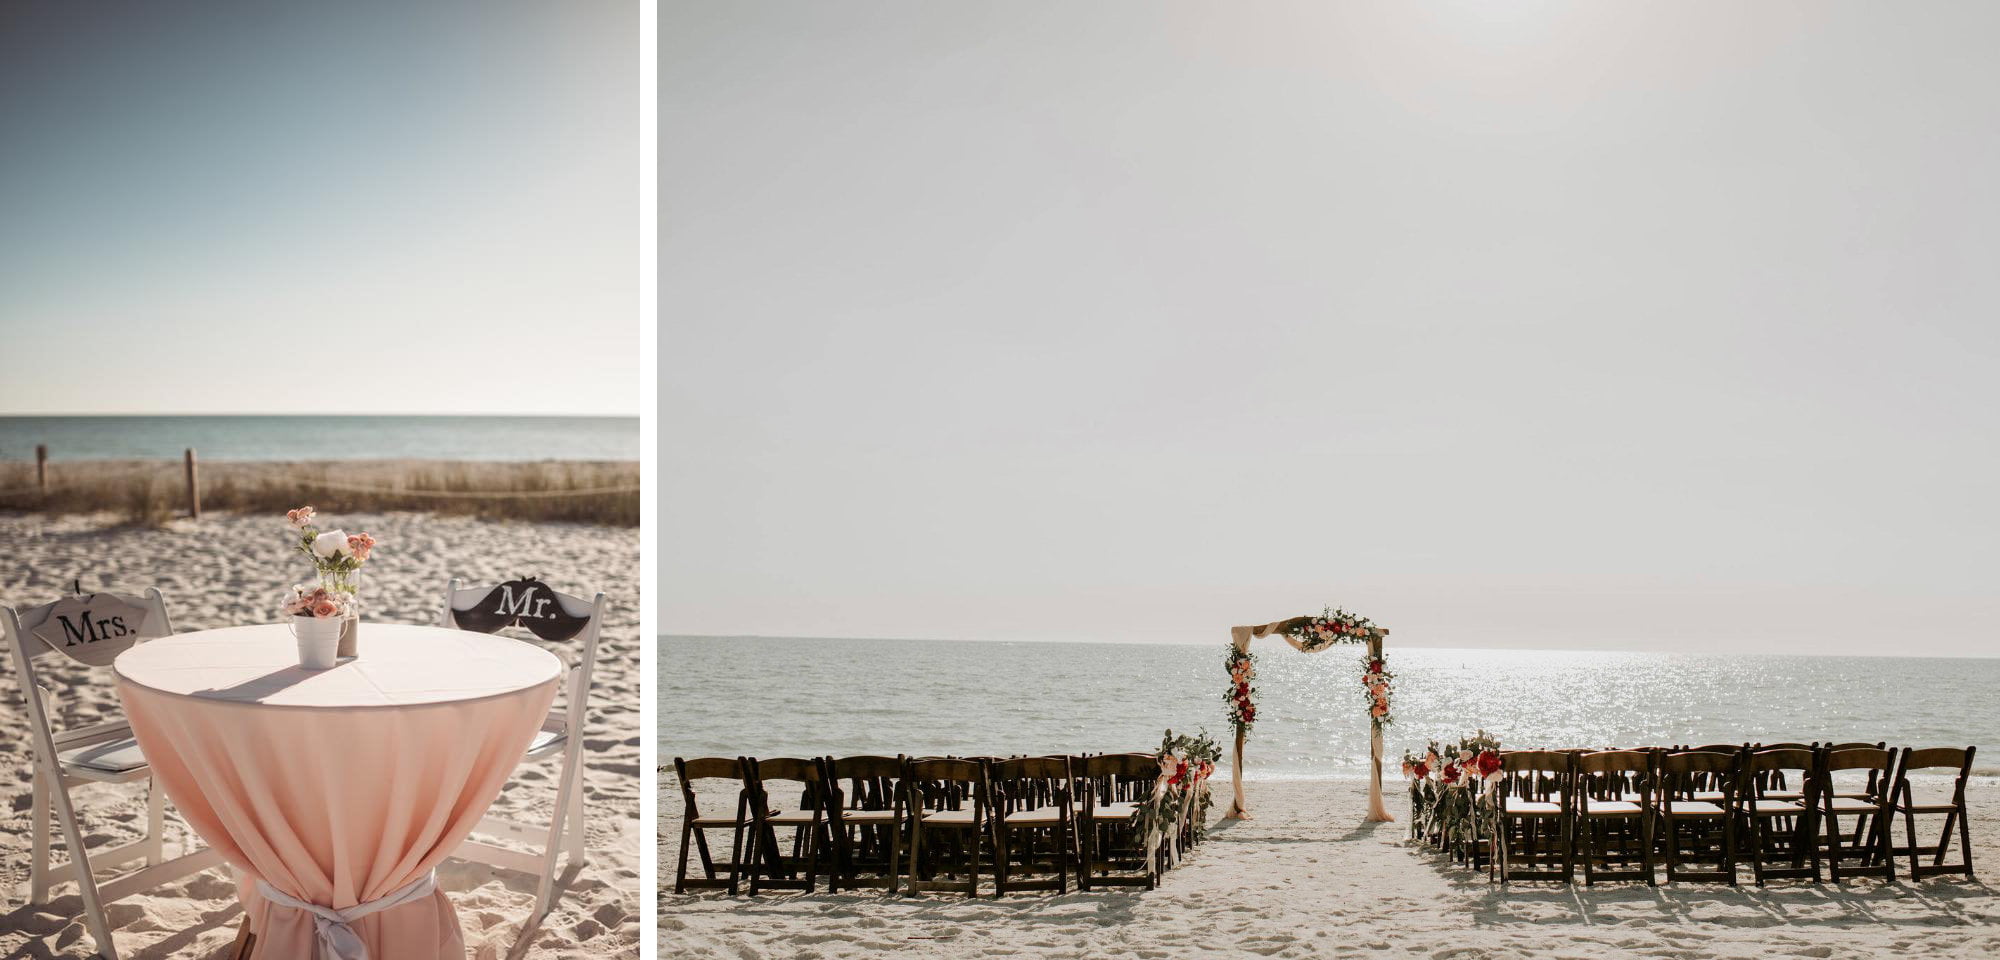 10 Questions to Ask Before Hiring a Beach Wedding Planner